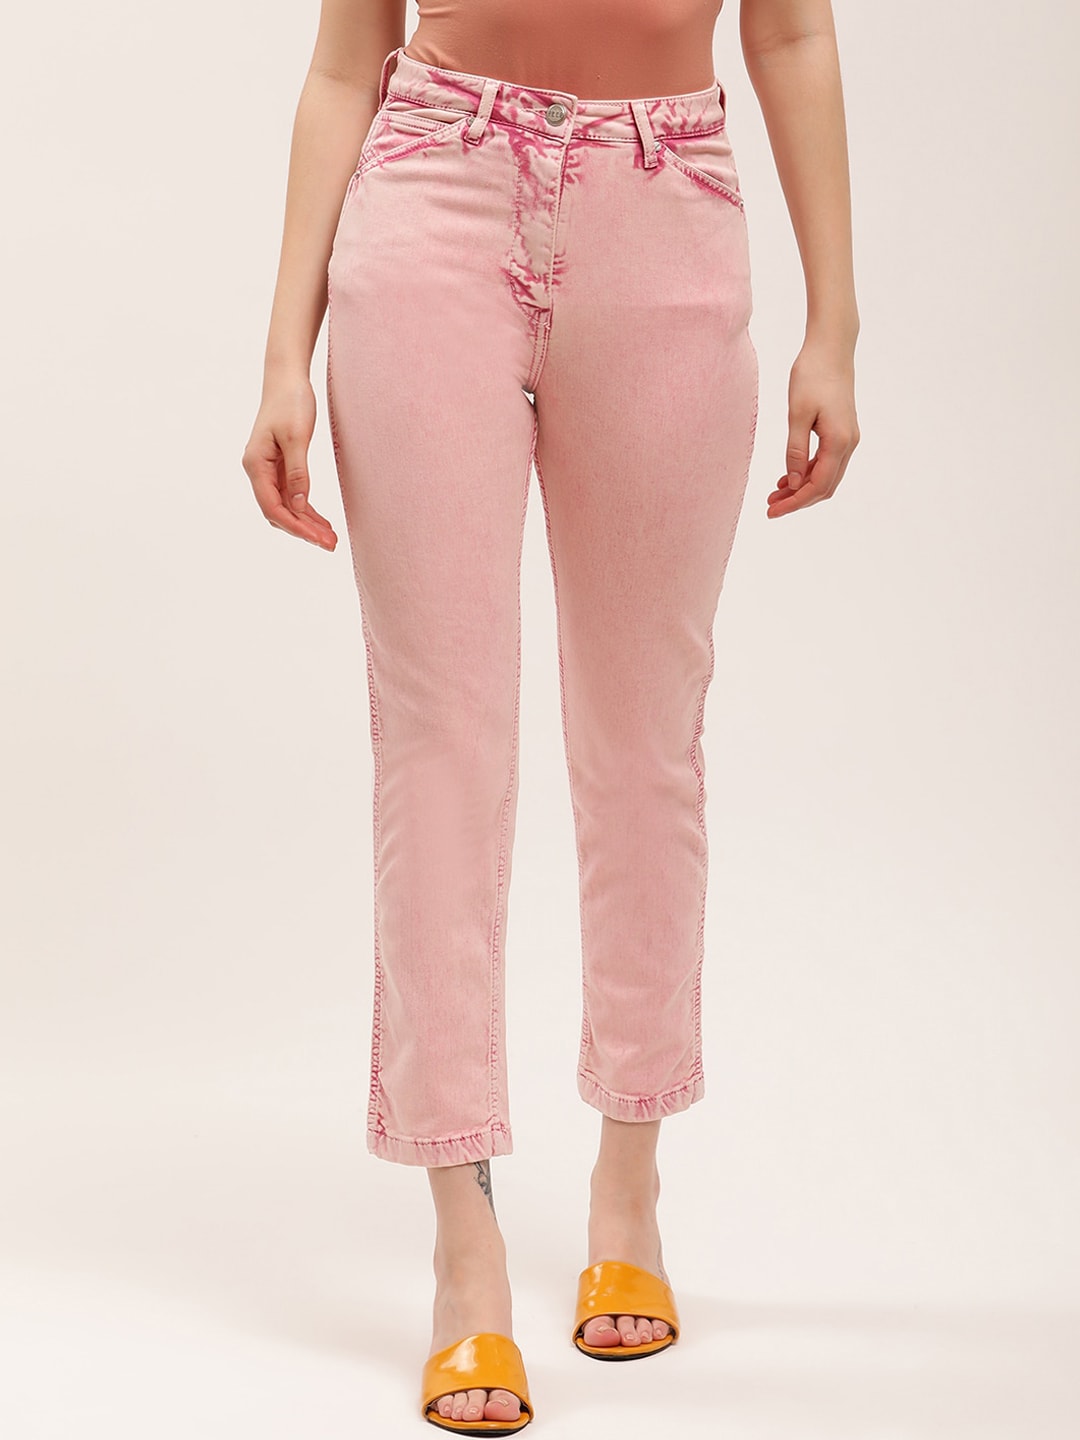 ELLE Women Pink-Coloured Cotton Mid-Rise Skinny Jeans Price in India